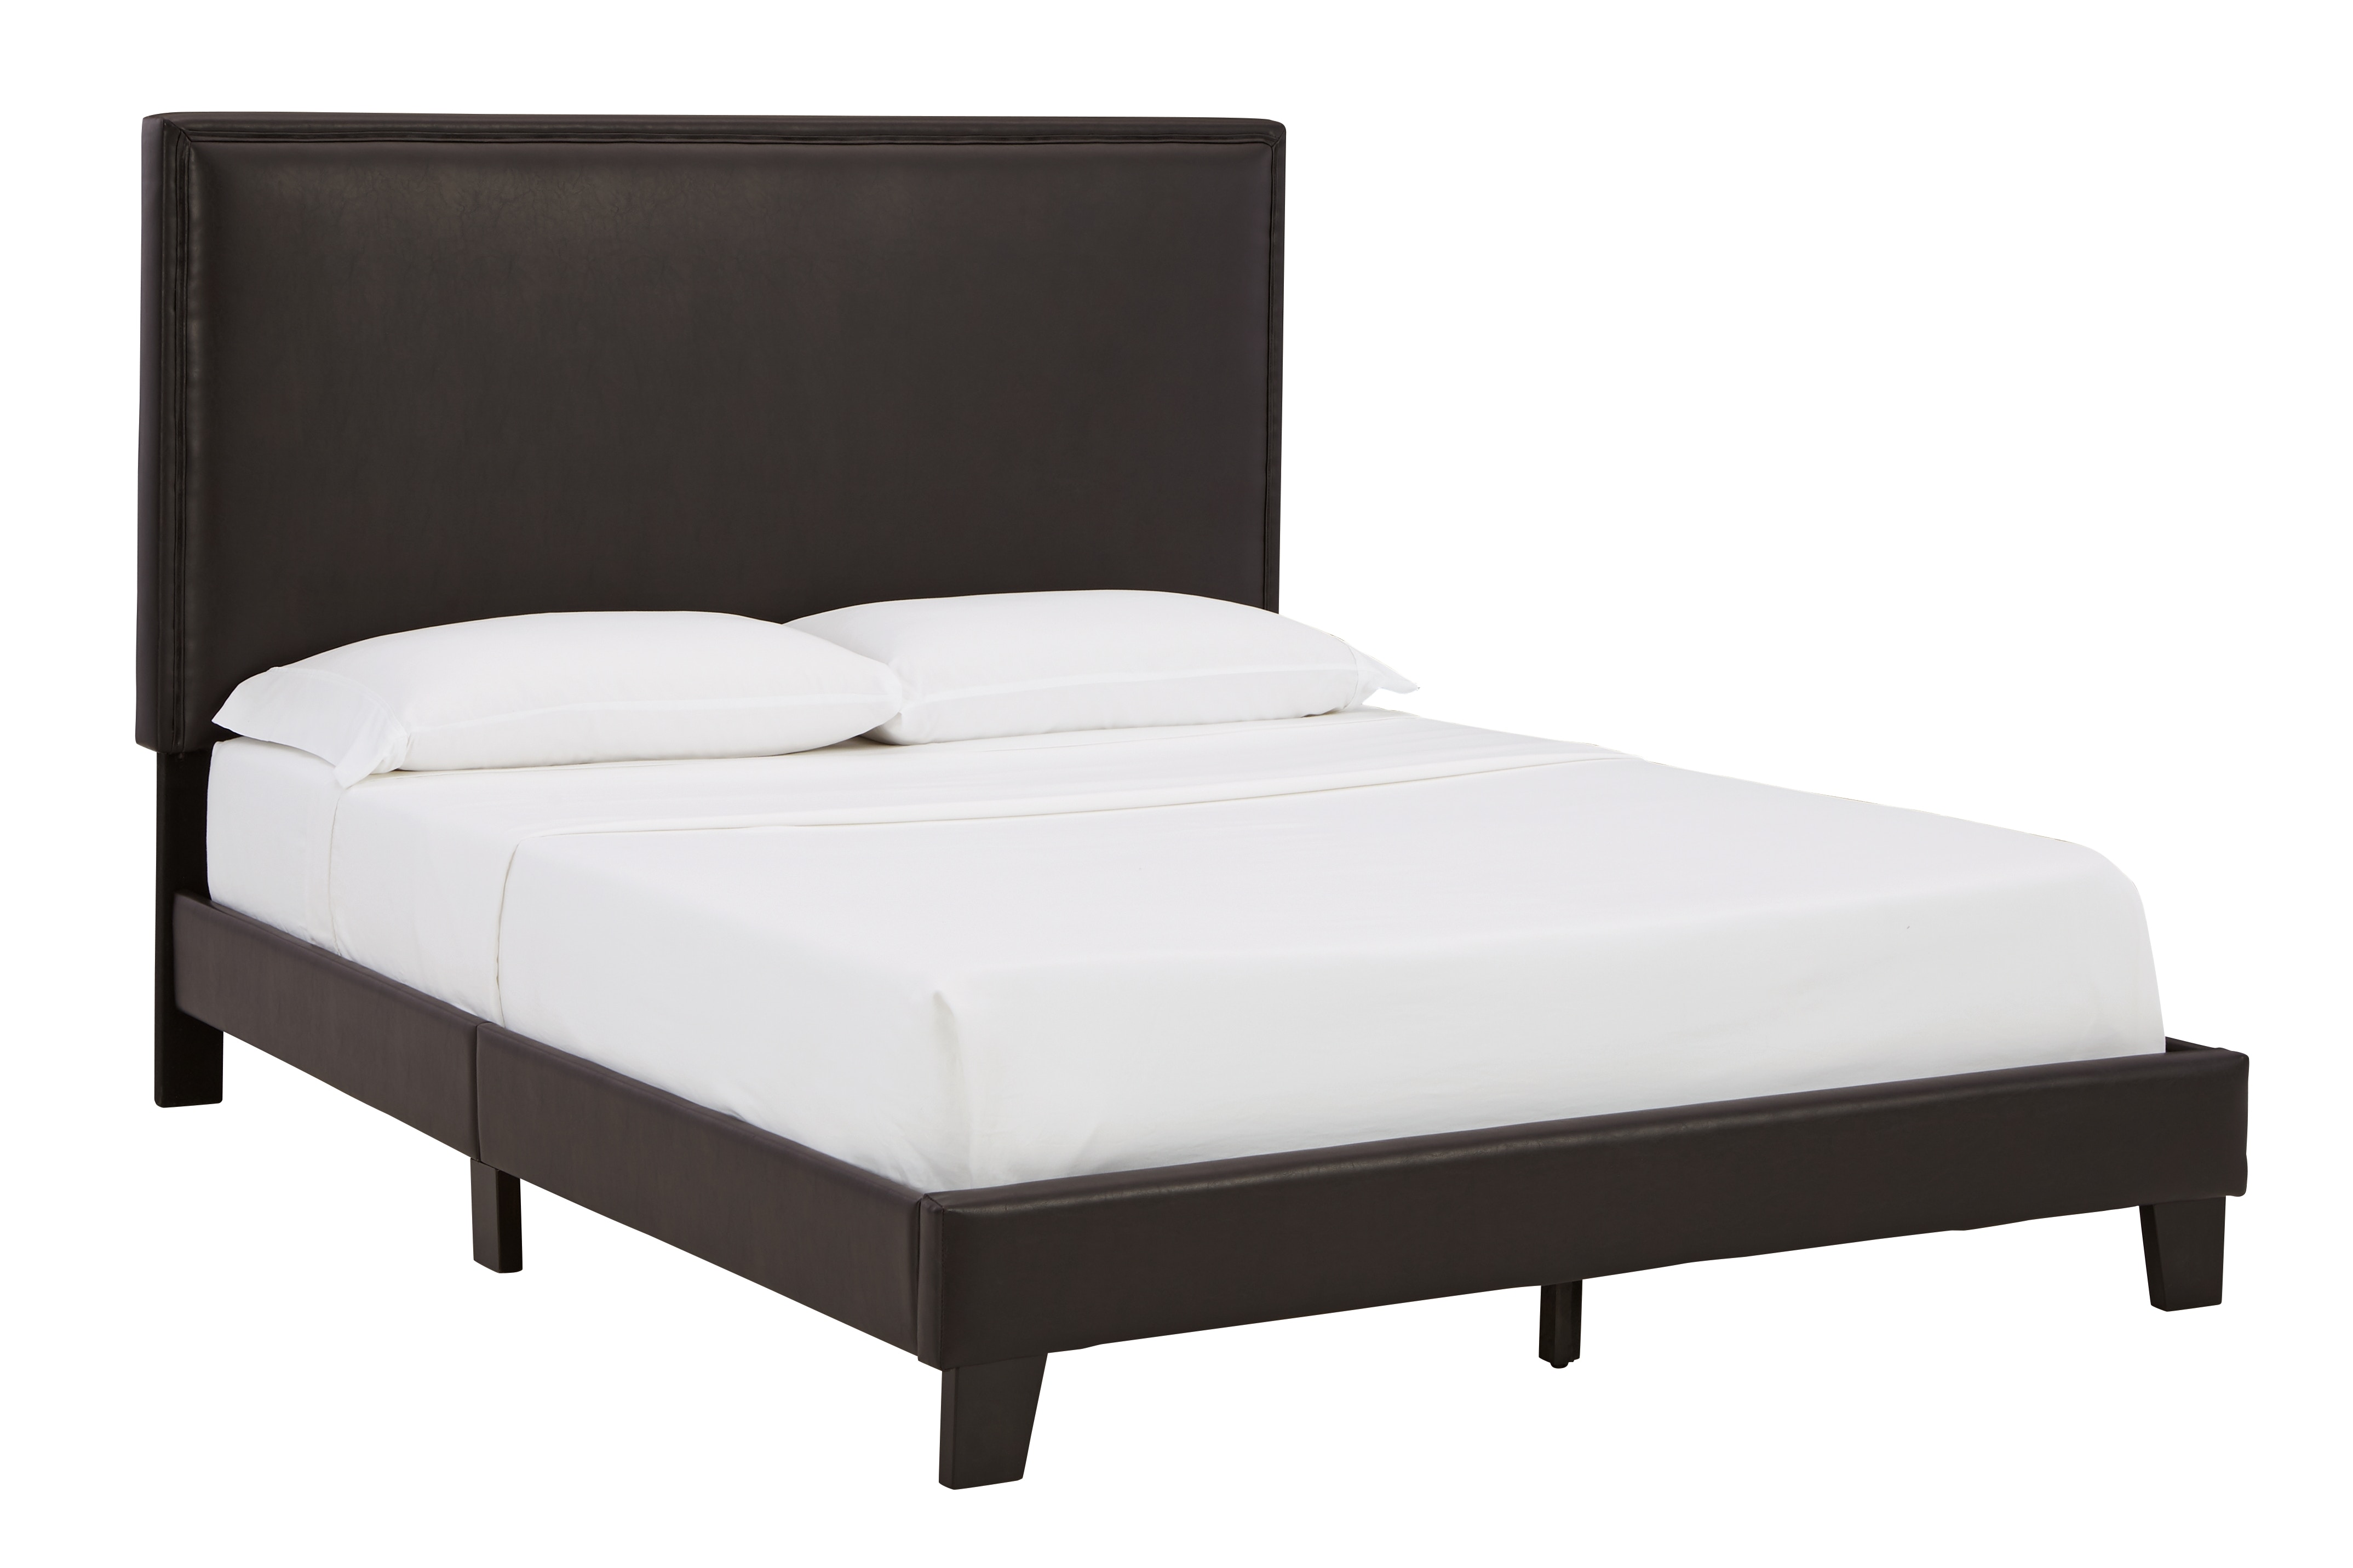 Miami All Colours Single Bed Headboard 3' Faux Leather